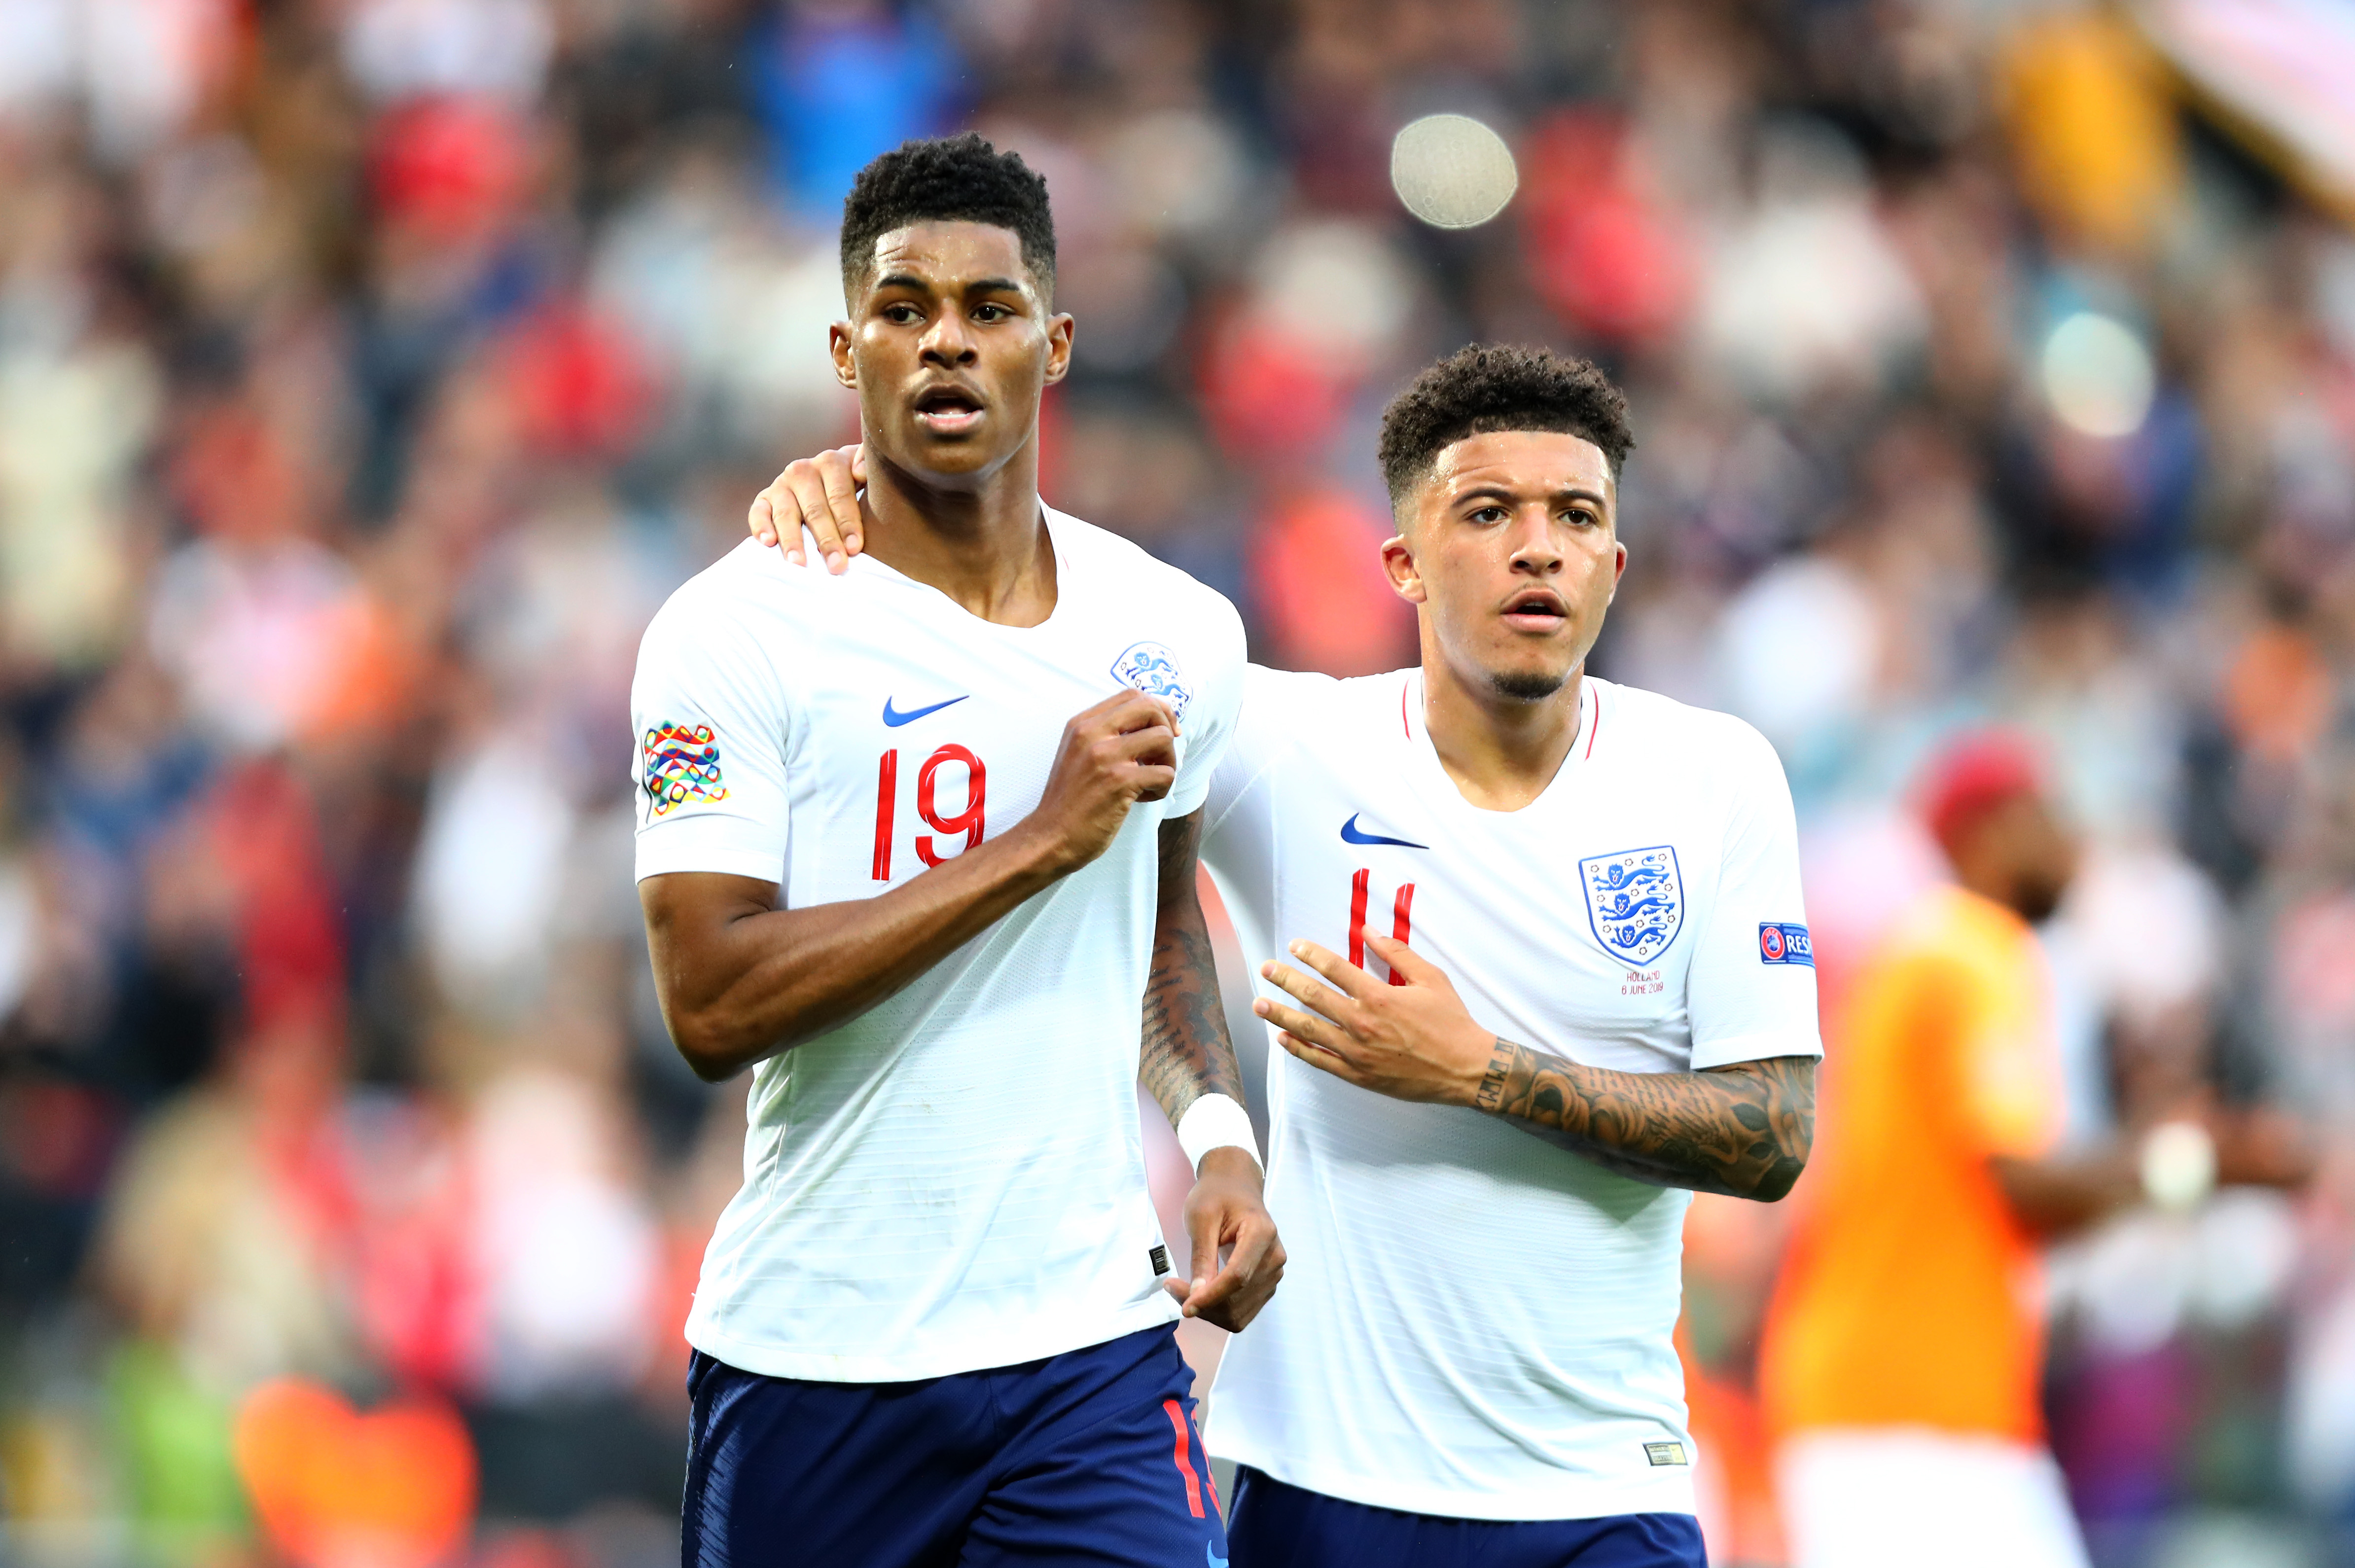 Marcus Rashford will not be available for England (Photo by Dean Mouhtaropoulos/Getty Images)